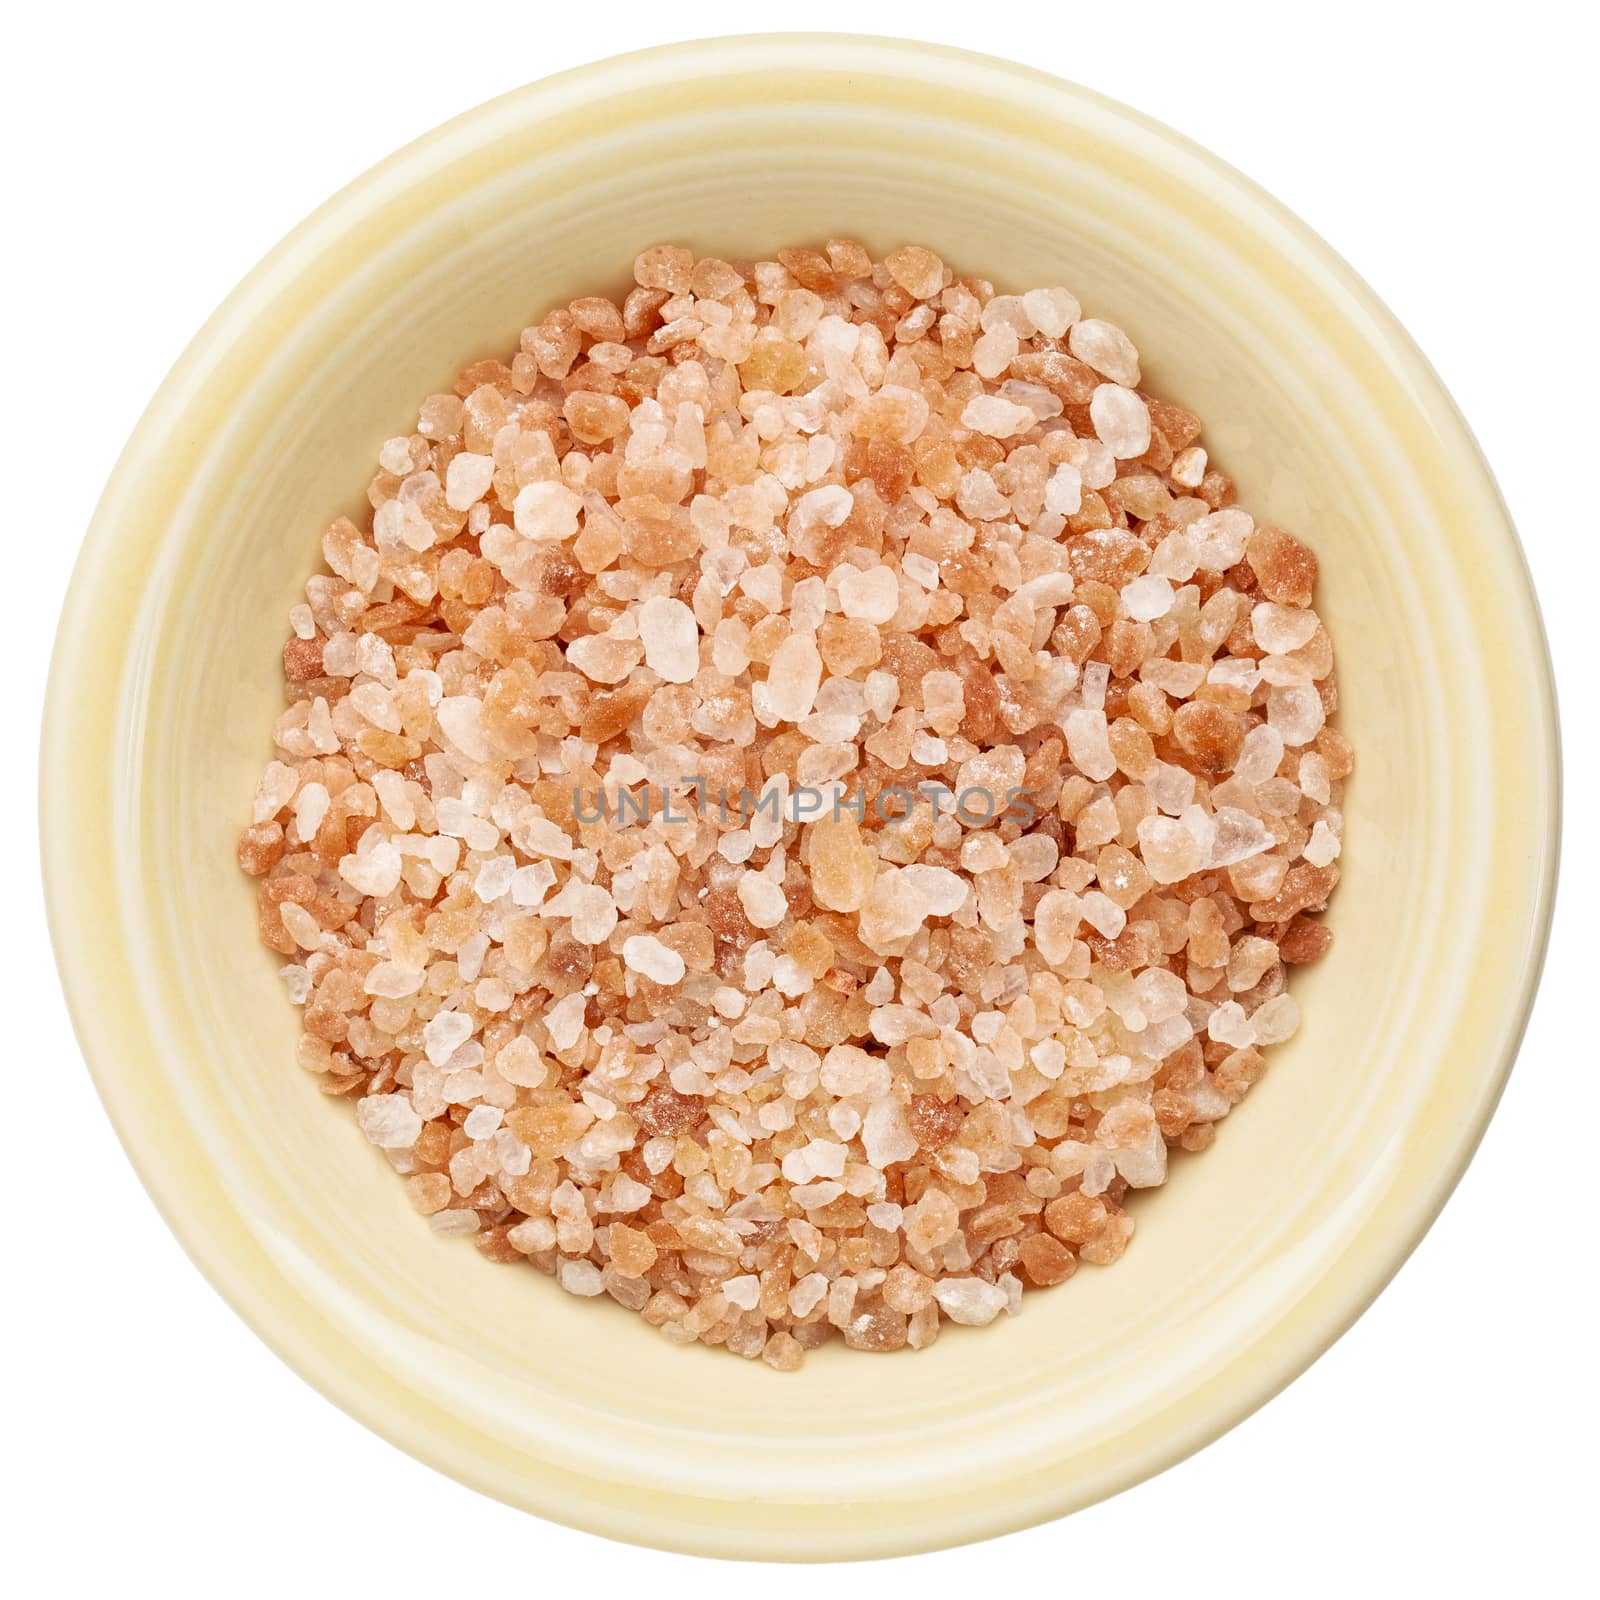 Himalayan salt coarse crystals in a ceramic bowl isolated on white